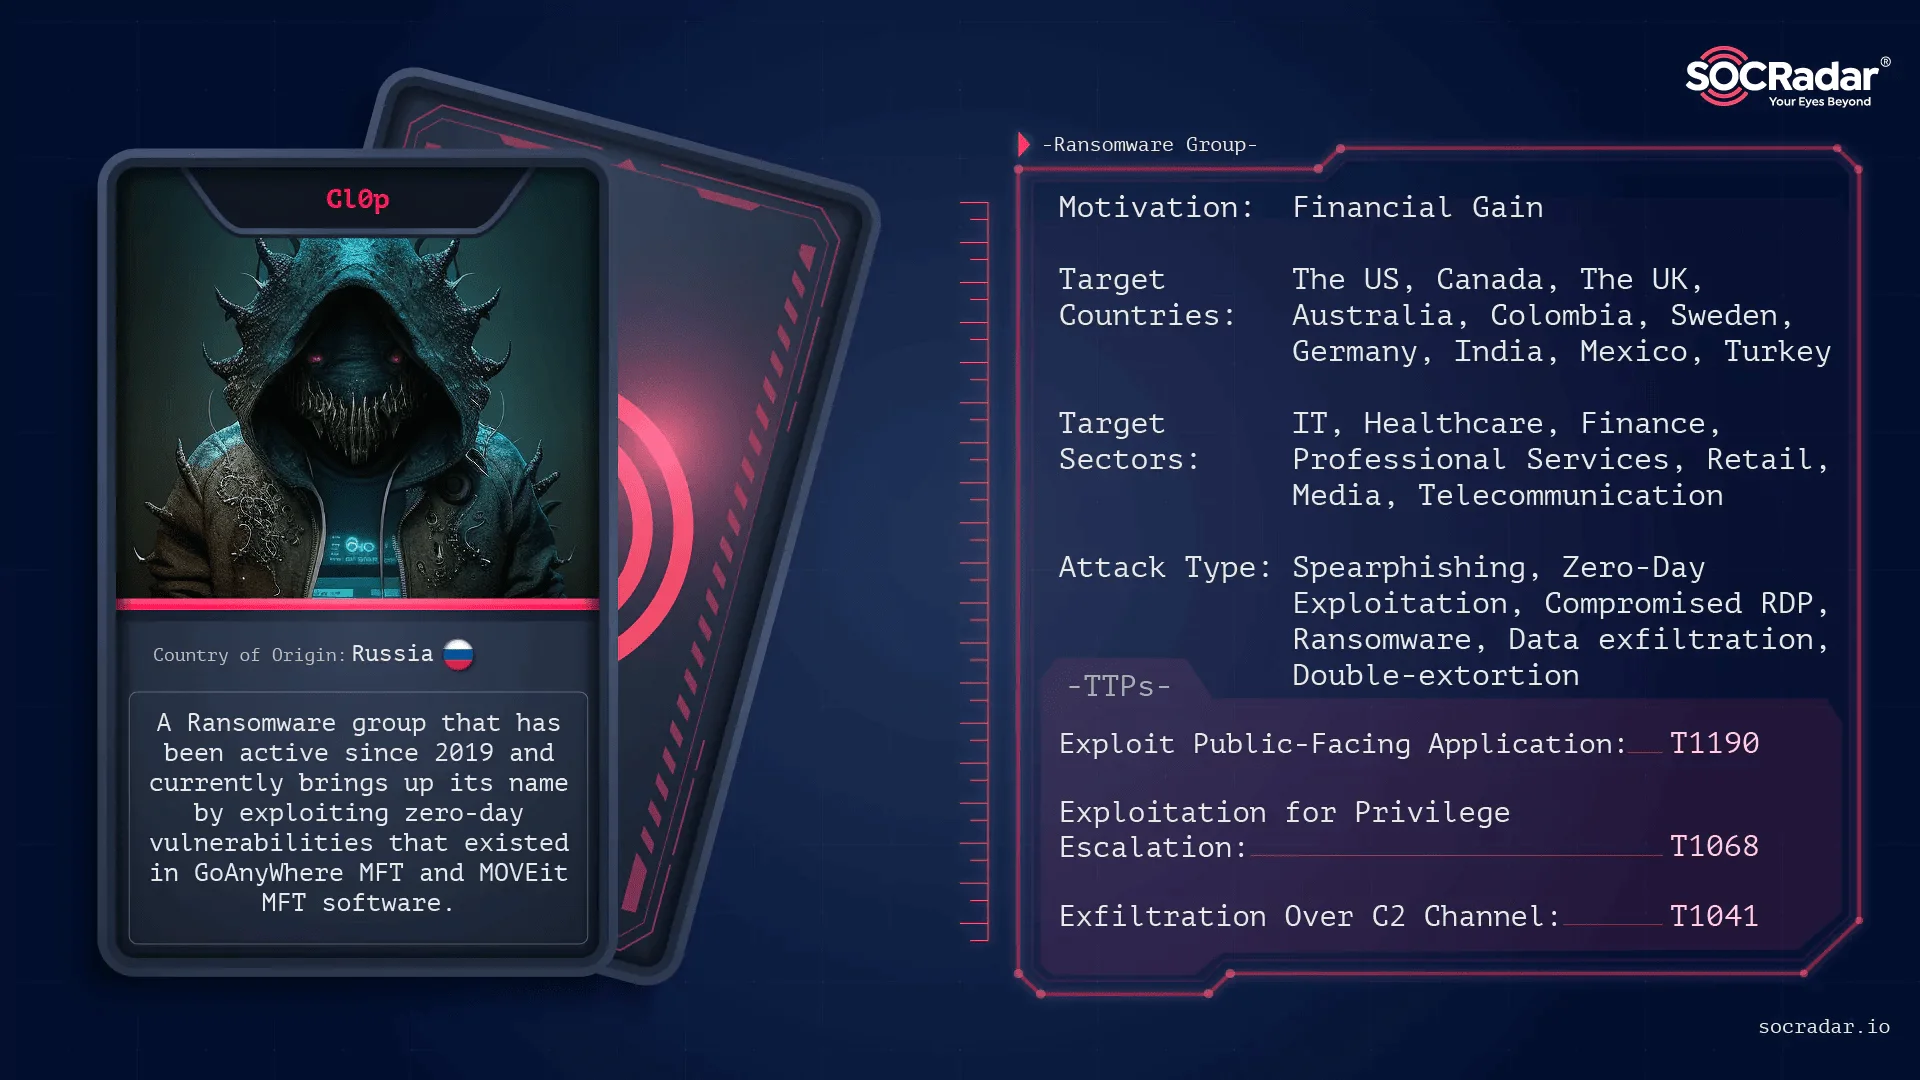 Threat Actor Card of Cl0p Ransomware Group